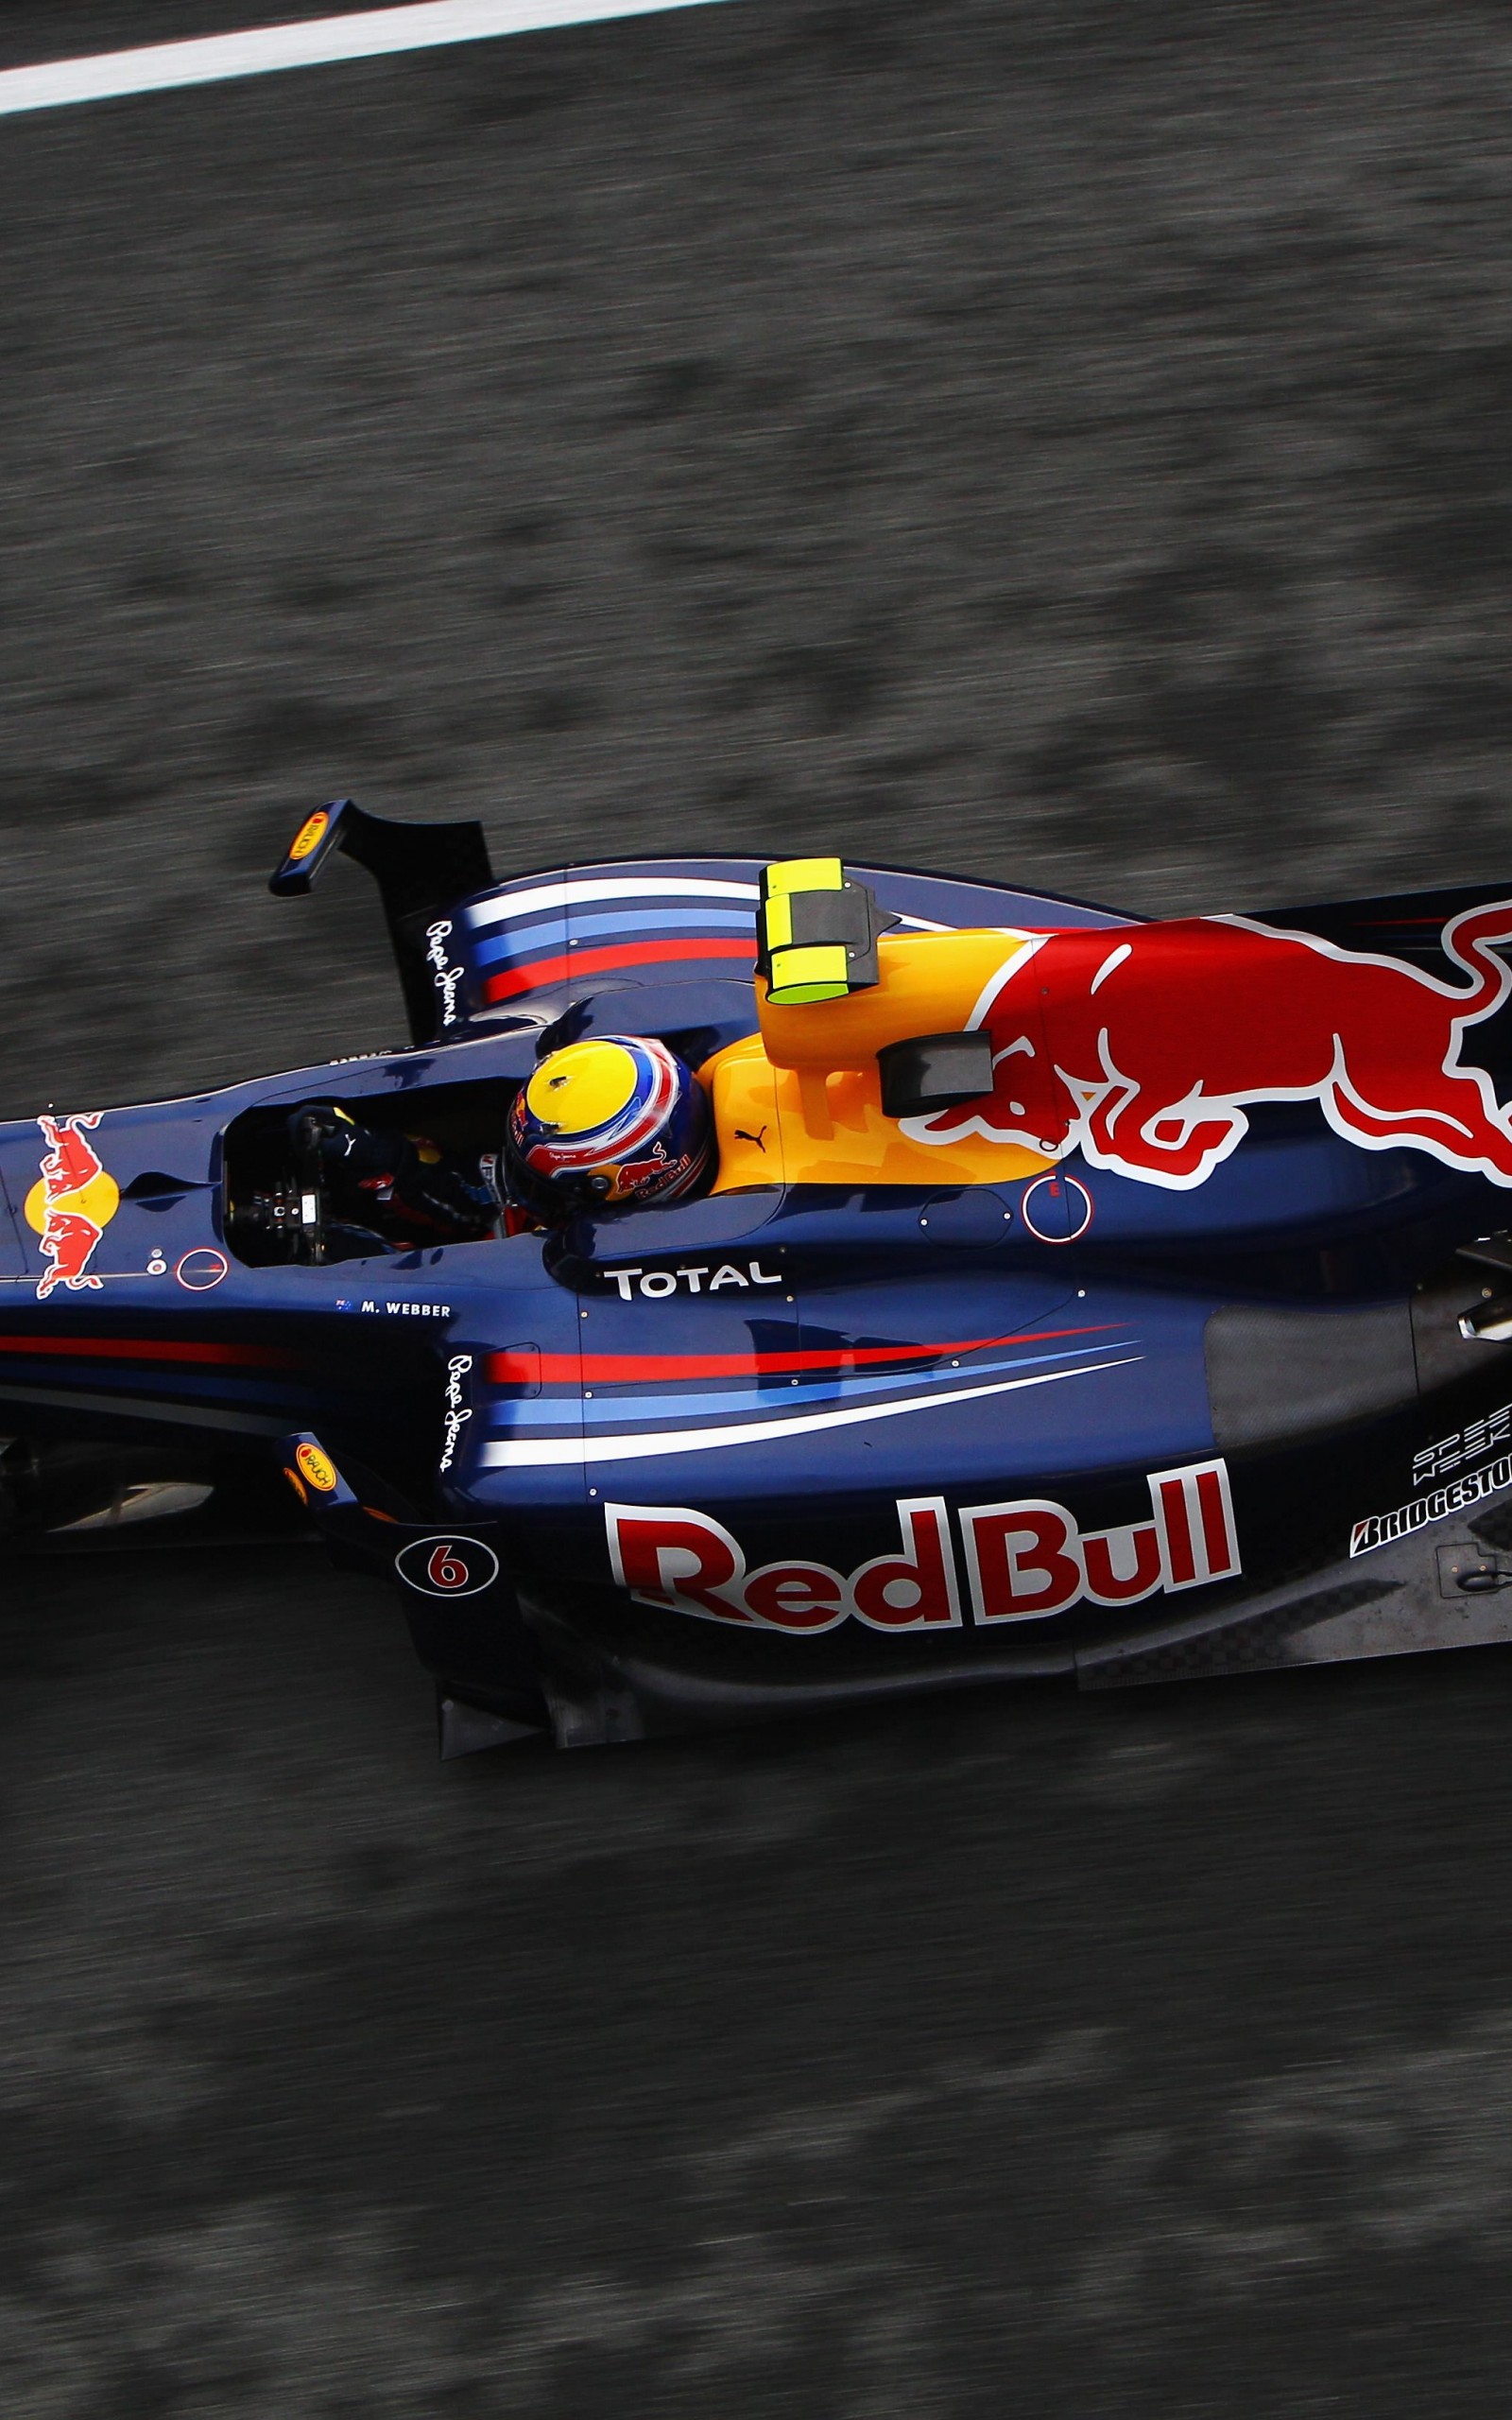 F1 Red Bull Team Wallpaper for Amazon Kindle Fire HDX 8.9